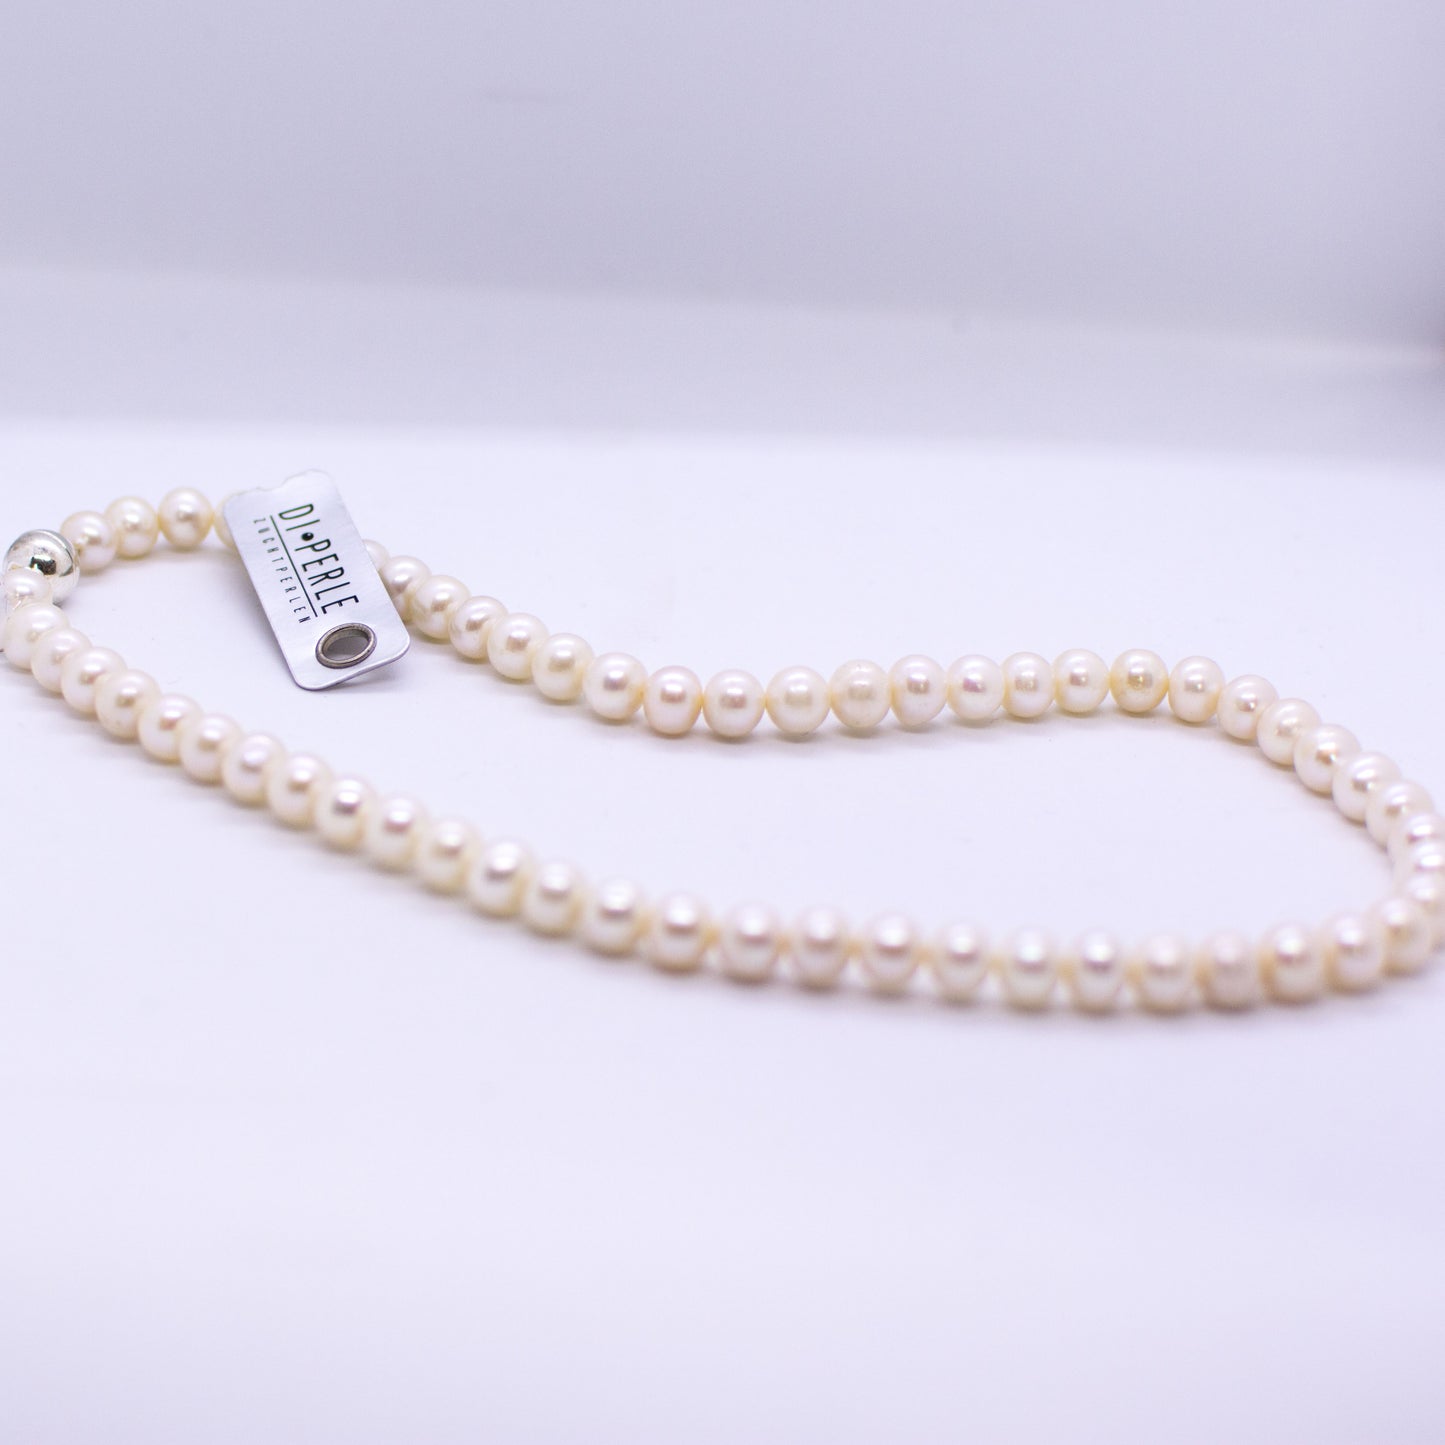 Cultured Freshwater Pearl Necklace - 7-8mm|42cm - John Ross Jewellers